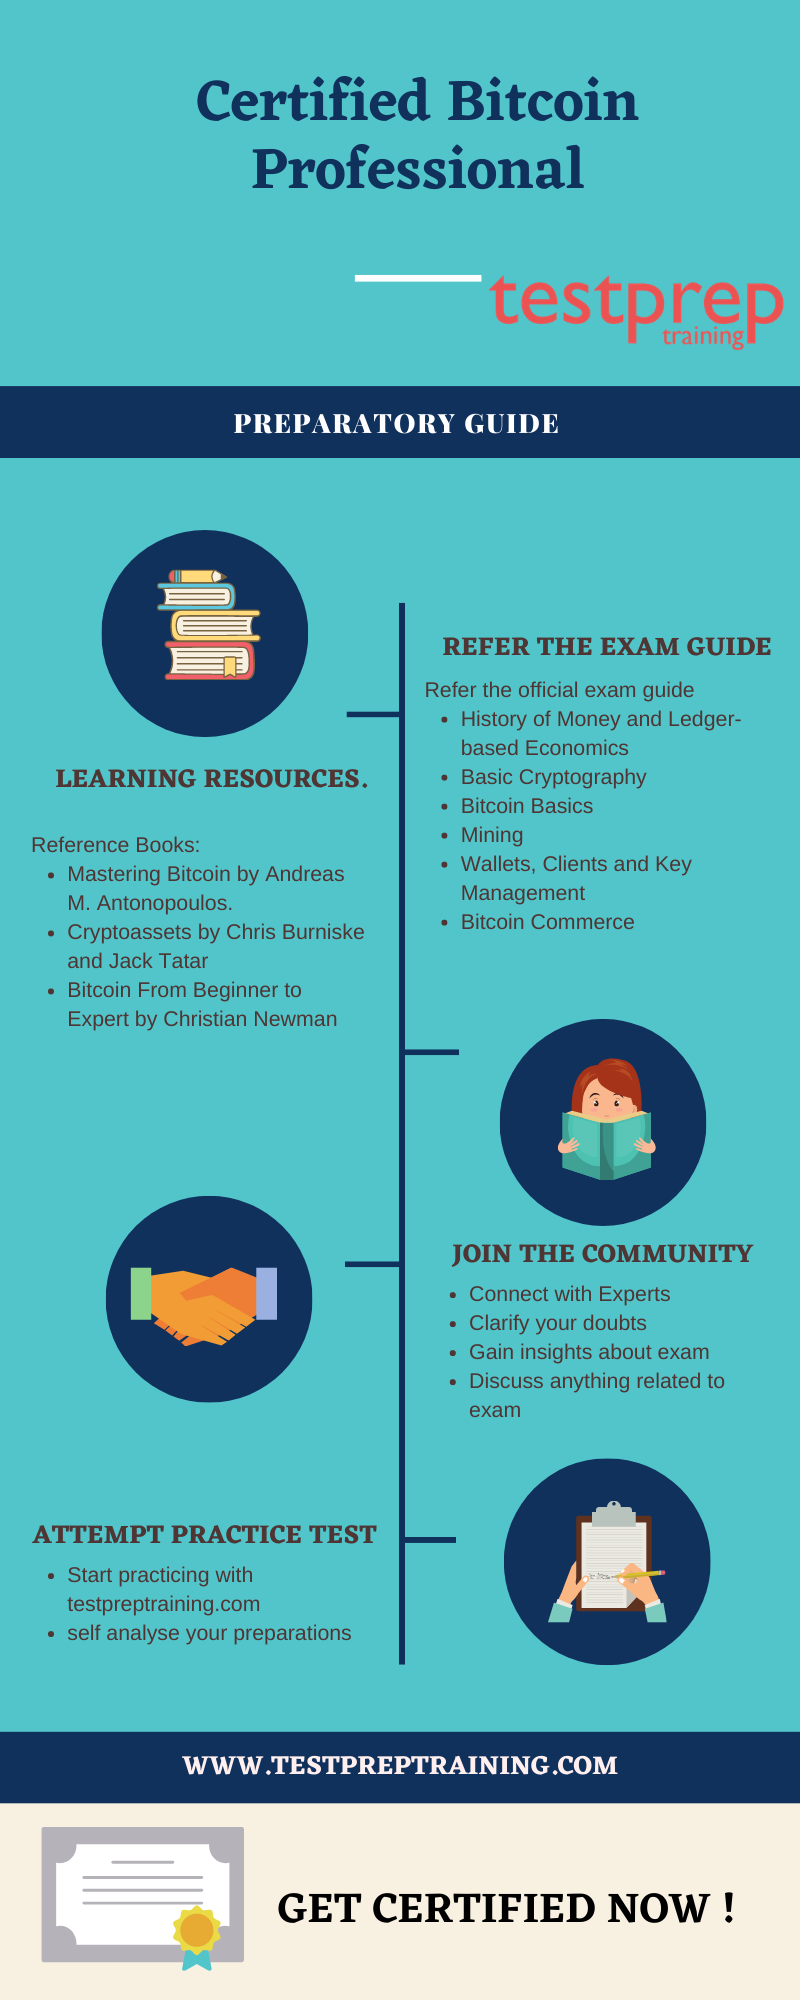 Preparatory Guide for Certified Bitcoin Professional